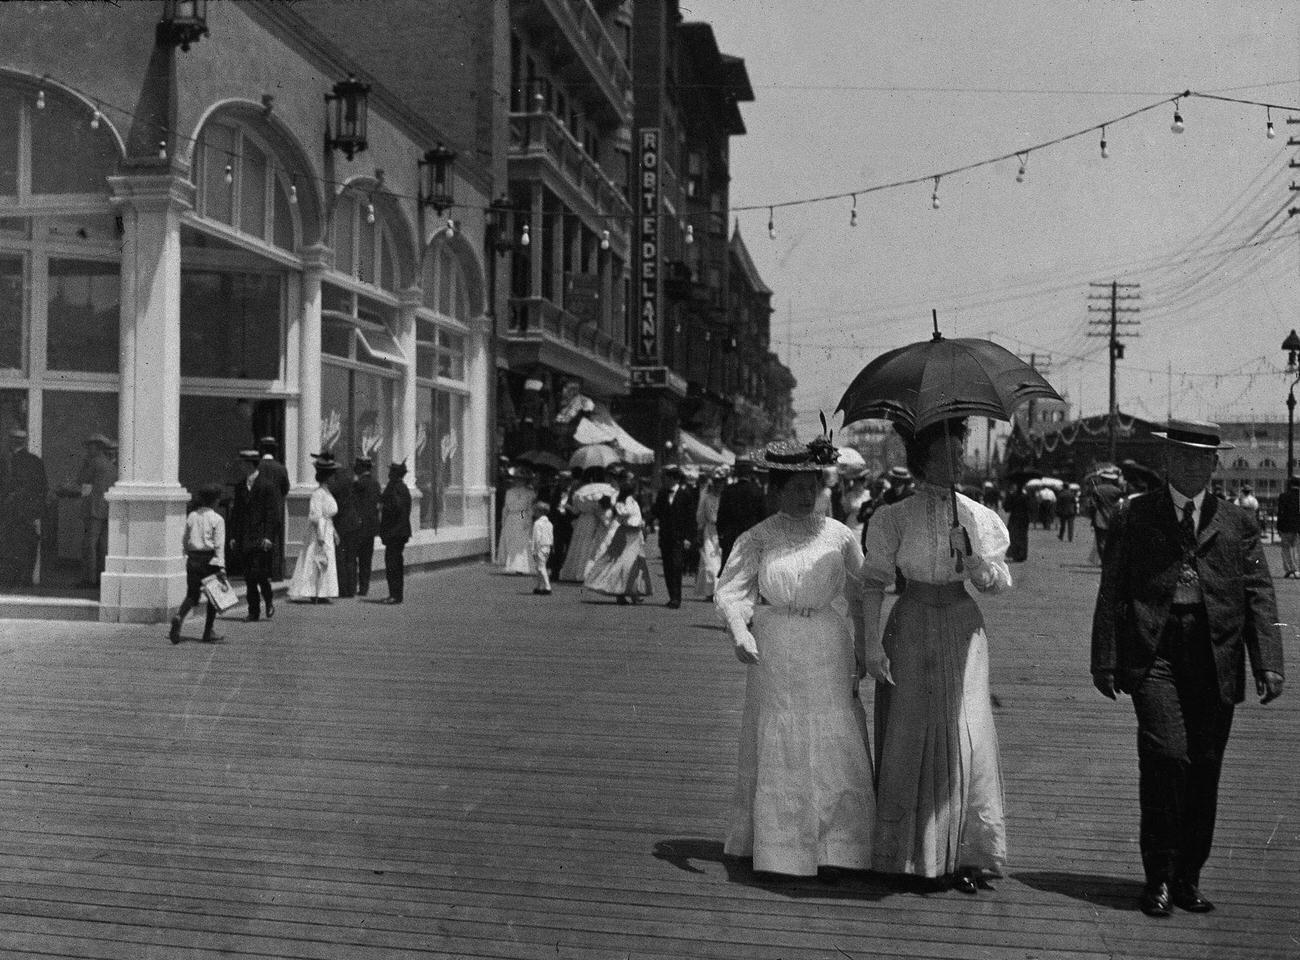 Holiday-Makers Window Shopping At Coney Island Boardwalk, 1897